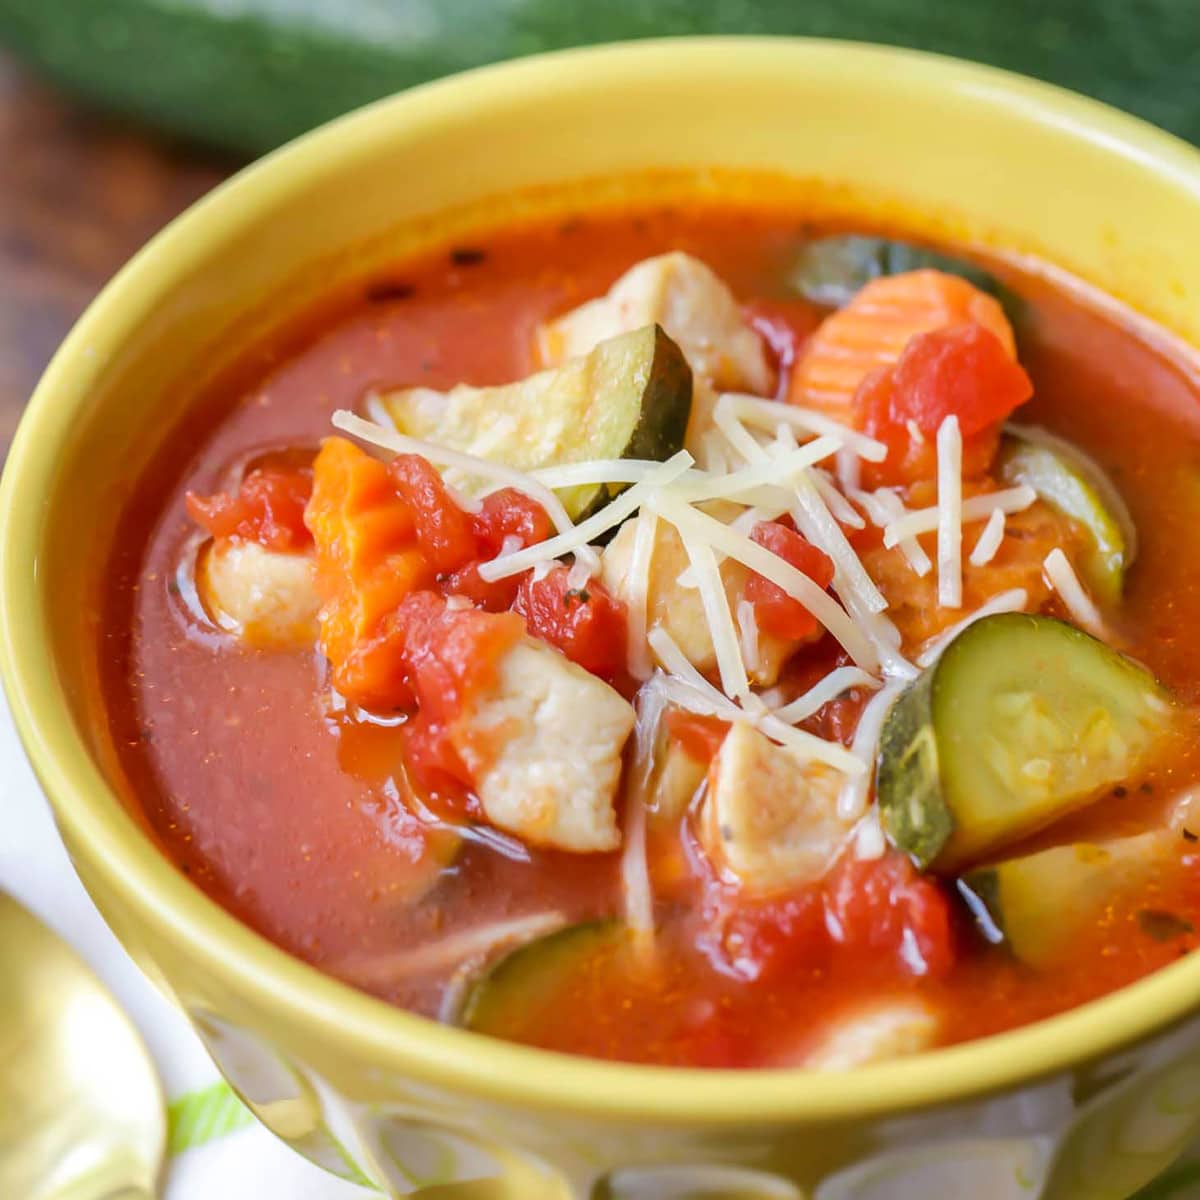 Healthy Soup Recipes  - Italian chicken and vegetable soup in a yellow bowl.